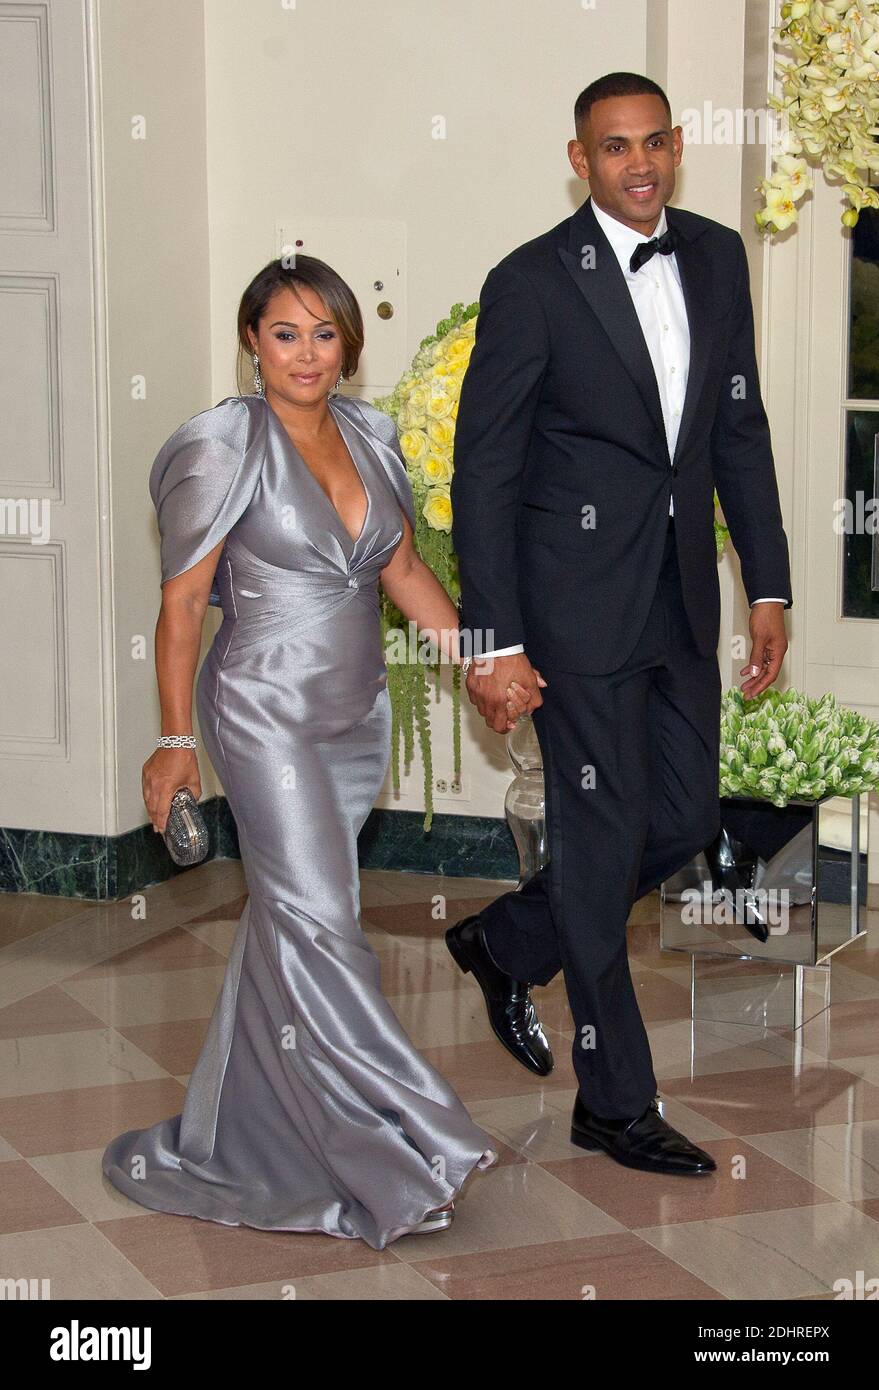 Grant Hill, Former Basketball Player, Member of The President?s Council on Fitness, Sports & Nutrition and Tamia Hill arrives for the State Dinner in honor of Prime Minister Trudeau and Mrs. Sophie Grégoire Trudeau of Canada at the White House in Washington, DC, USA, on Thursday, March 10, 2016. Photo by Ron Sachs/CNP/Pool/ABACAPRESS.COM Stock Photo